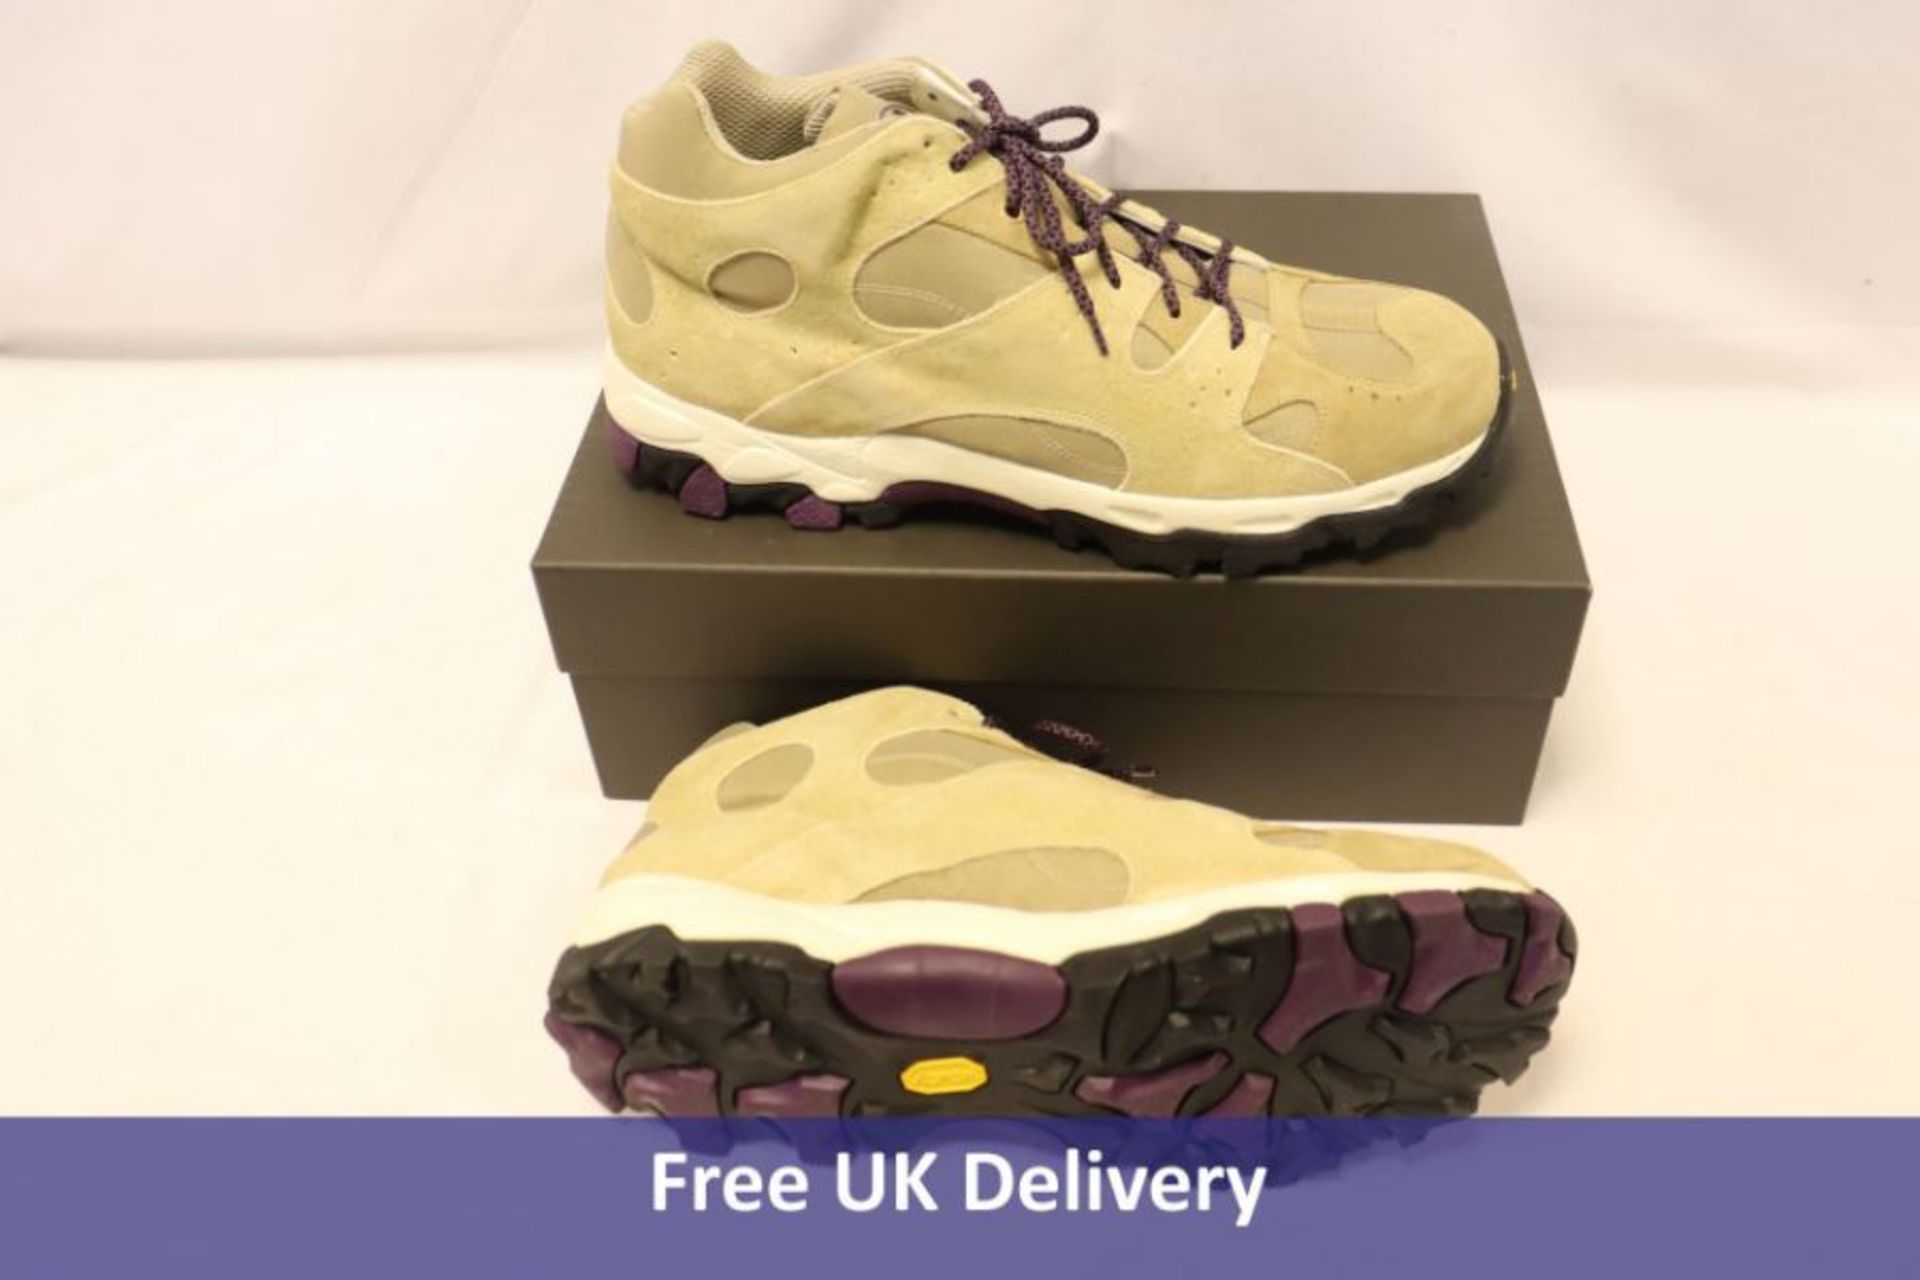 Our Legacy Cage Hiking Sneaker, Sawdust, UK 9.5